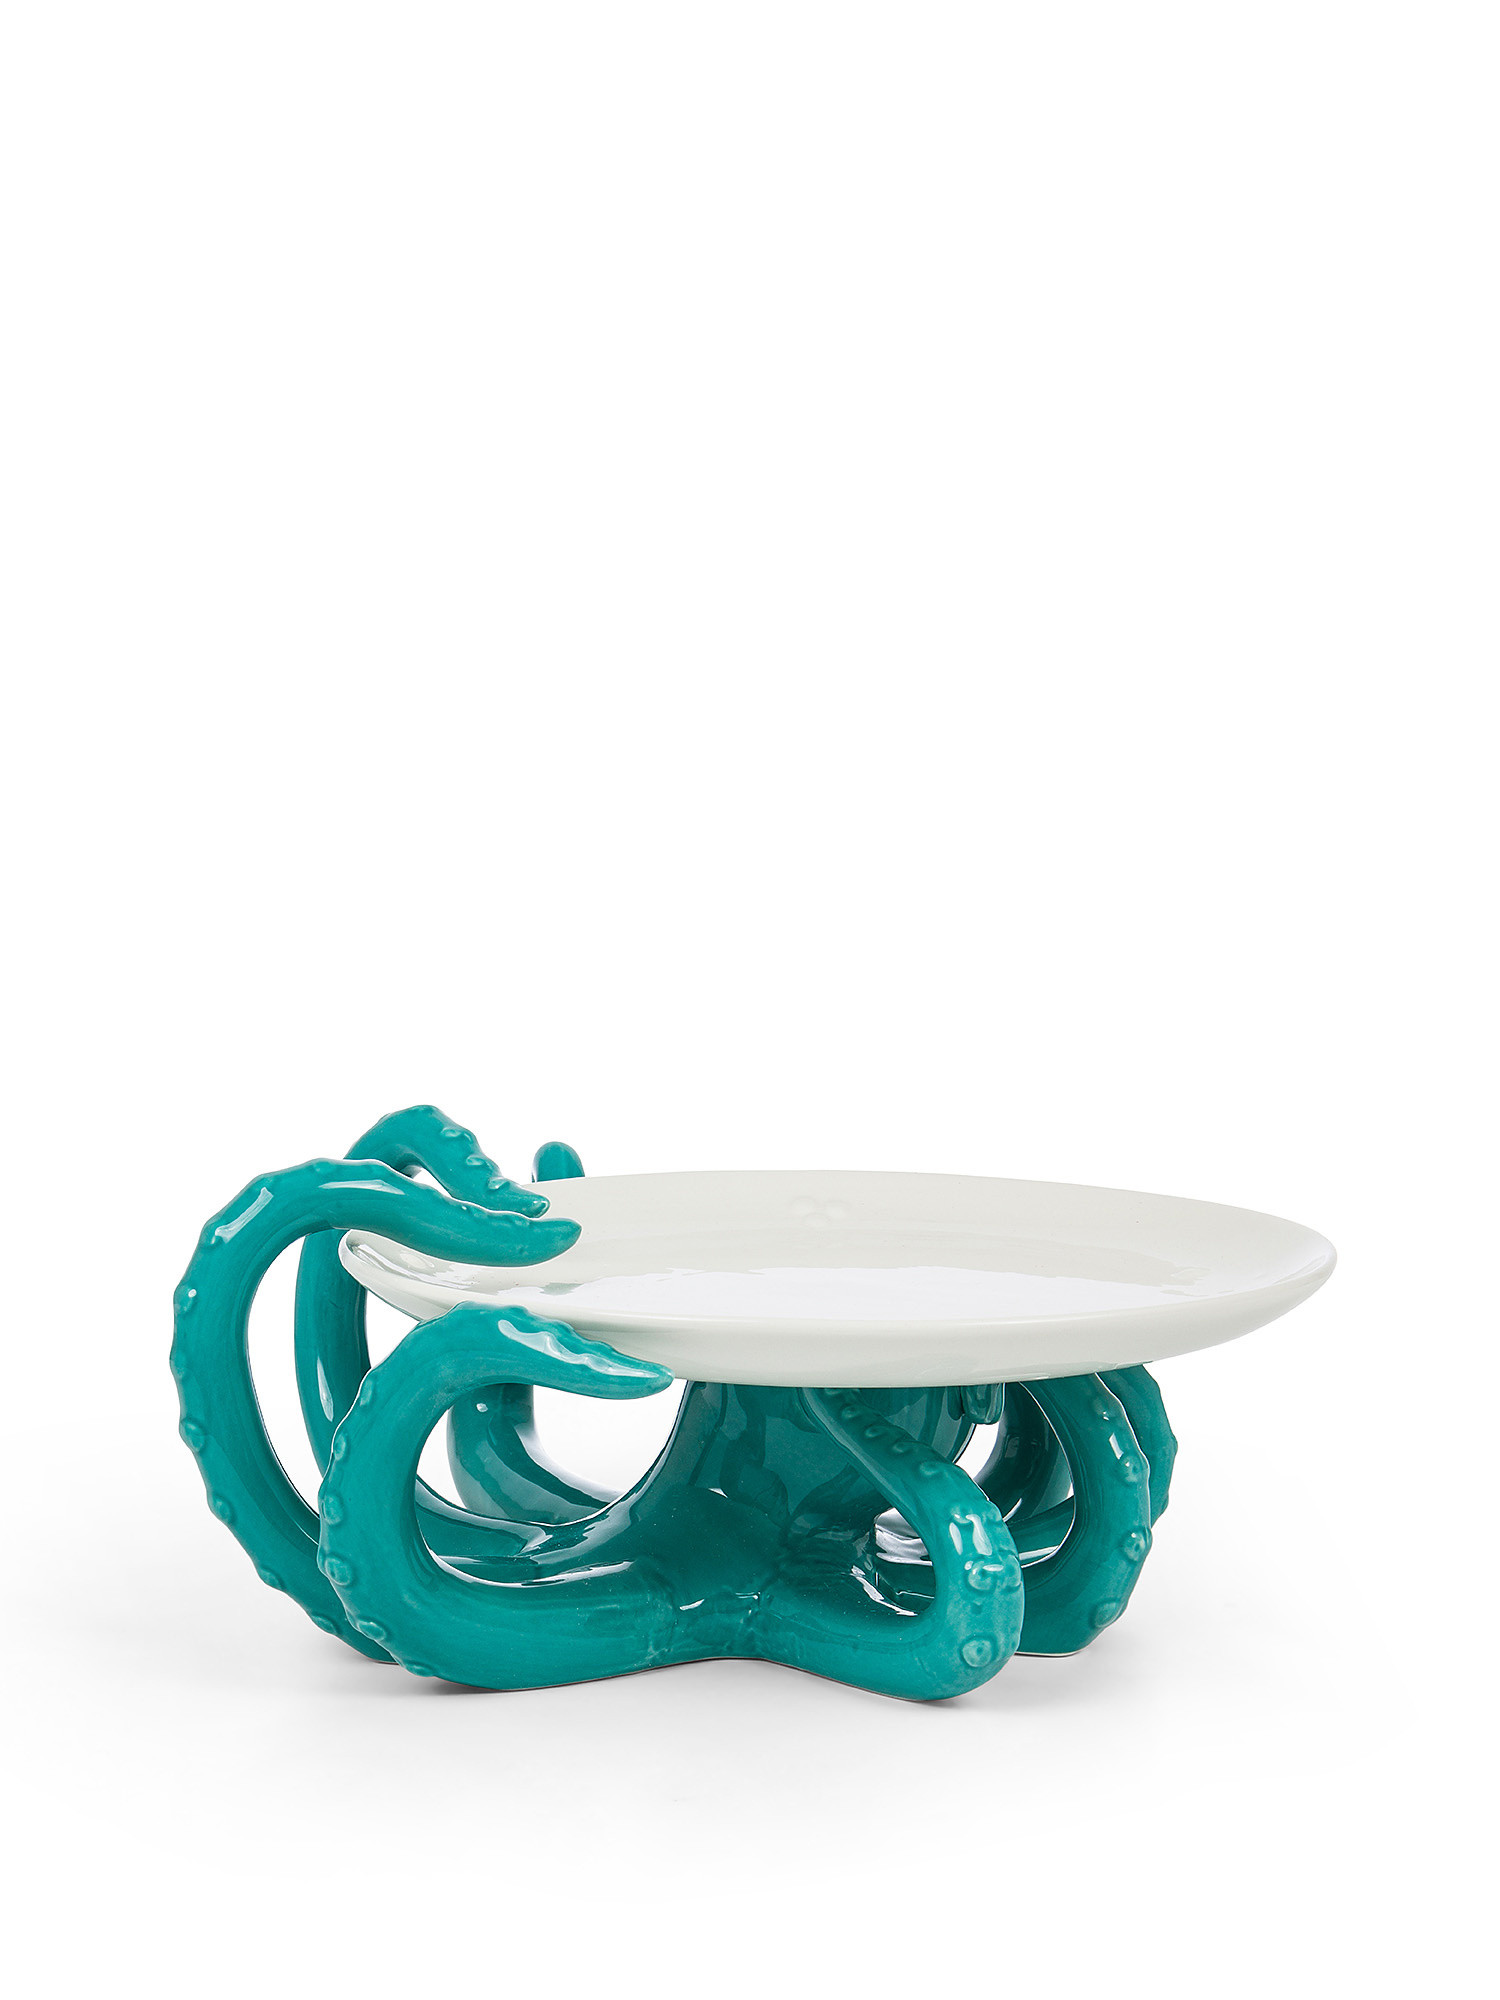 Ceramic cake stand with tentacles detail, White, large image number 0